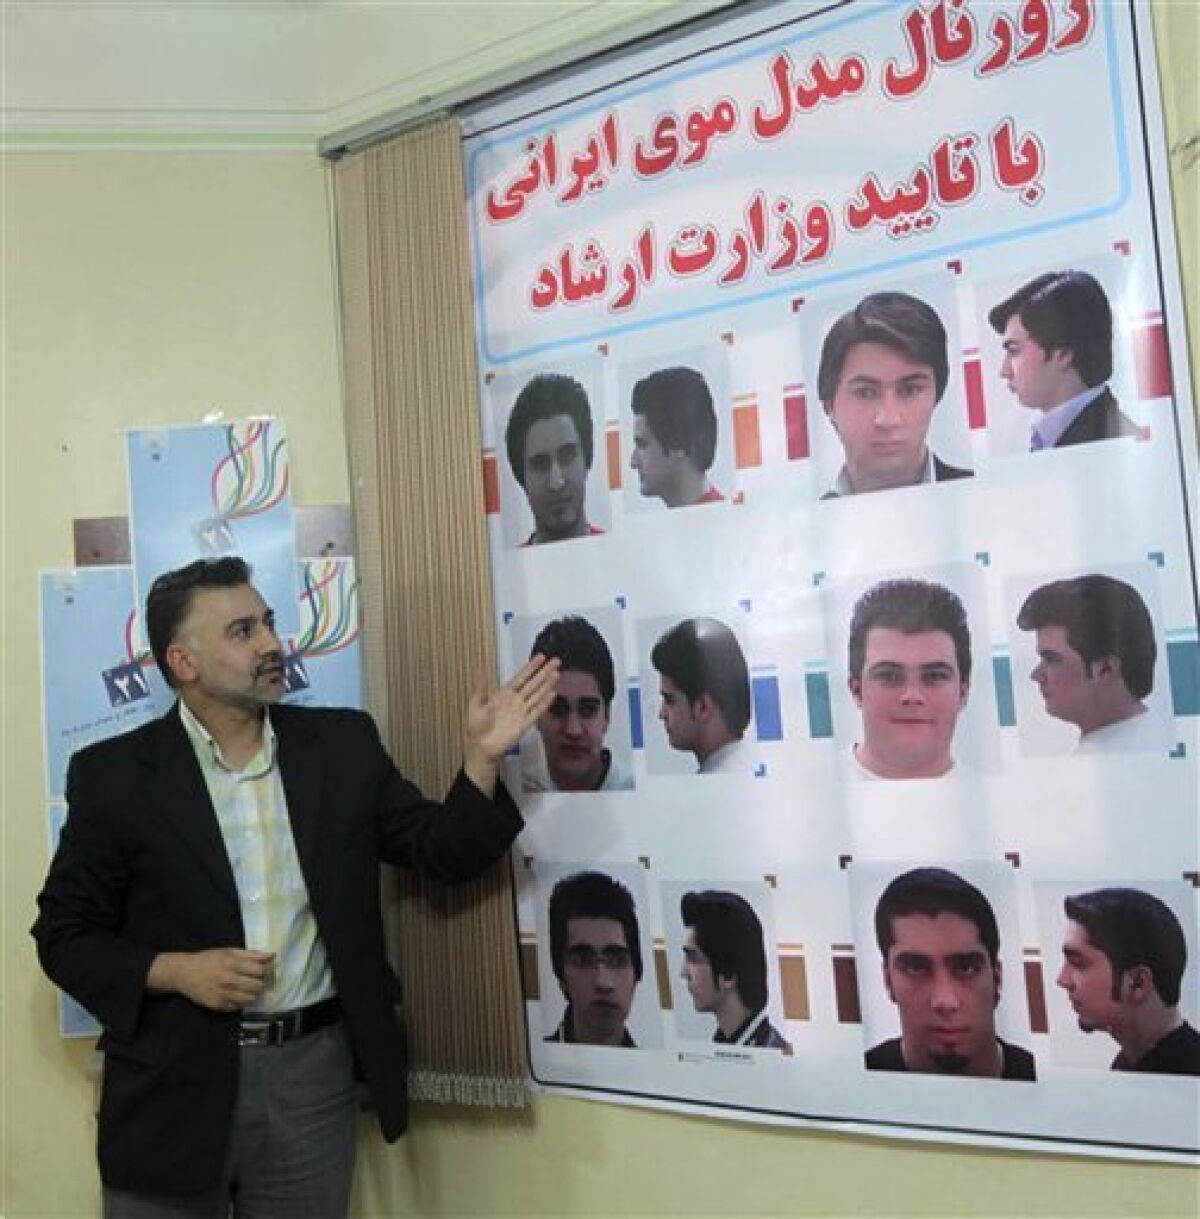 Iran offers modest new haircut guidelines for men - The San Diego  Union-Tribune